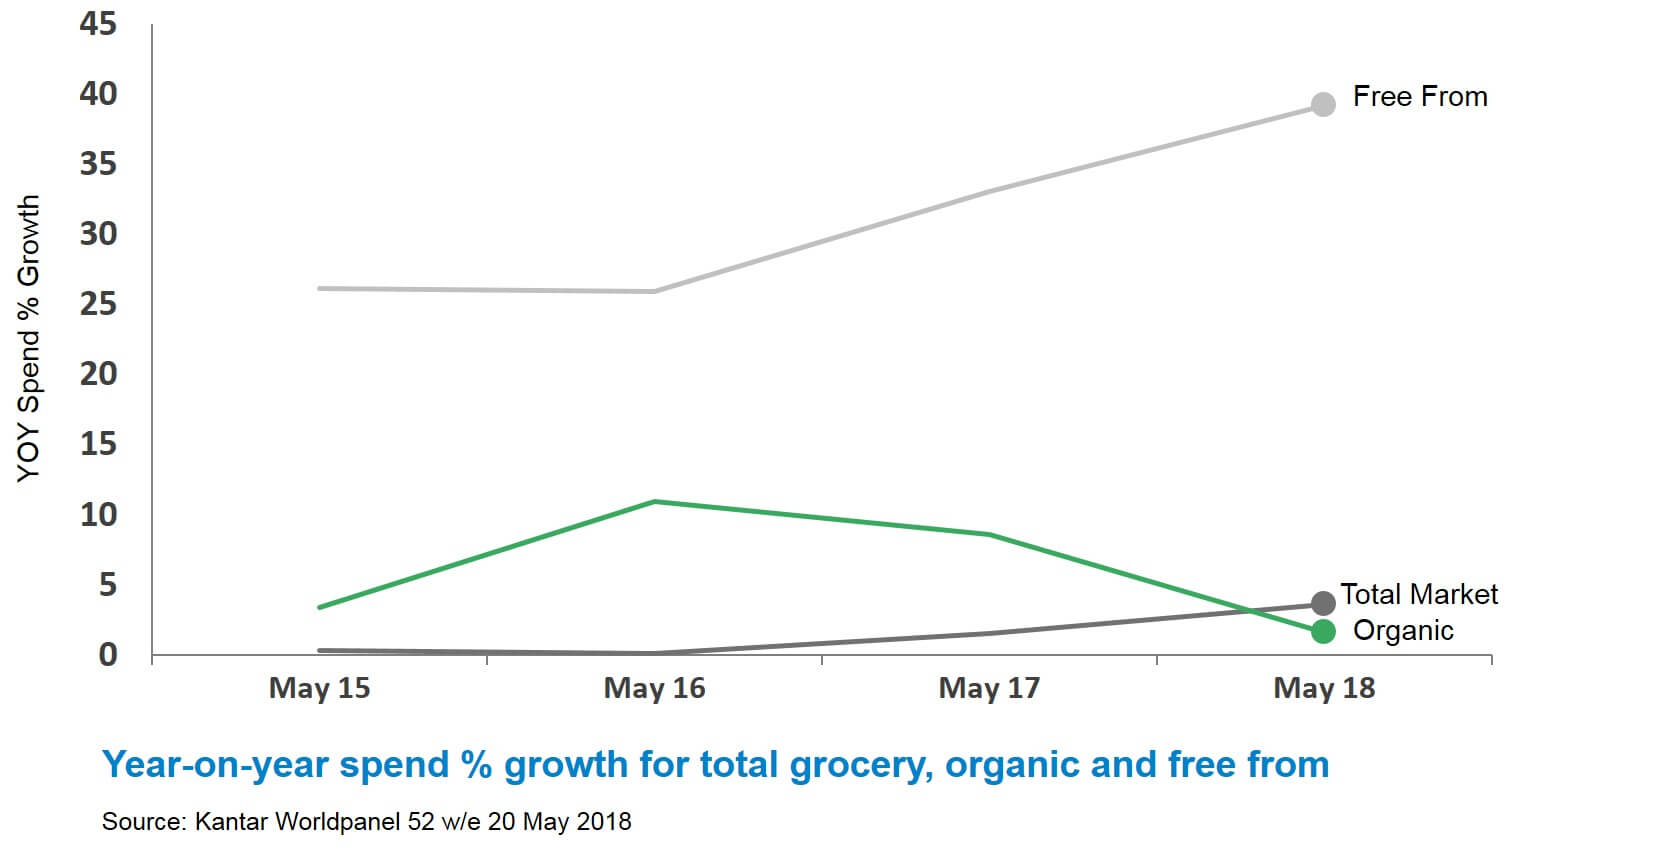 Graph of year-on-year spend percentage growth for total grocery, free from and organic